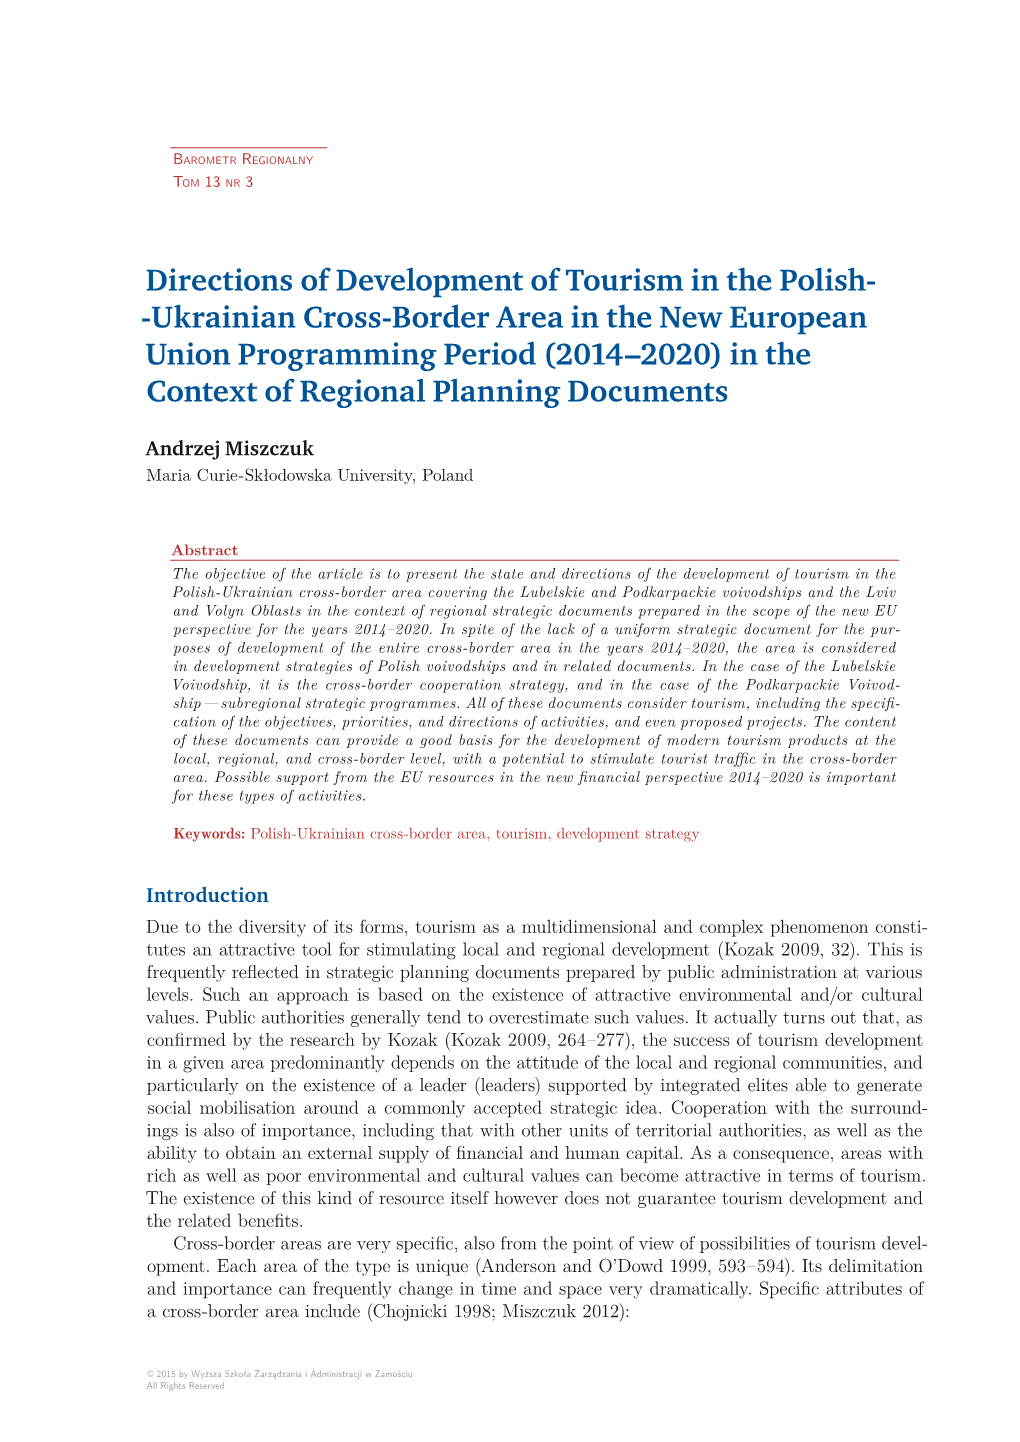 Directions of Development of Tourism in the Polish